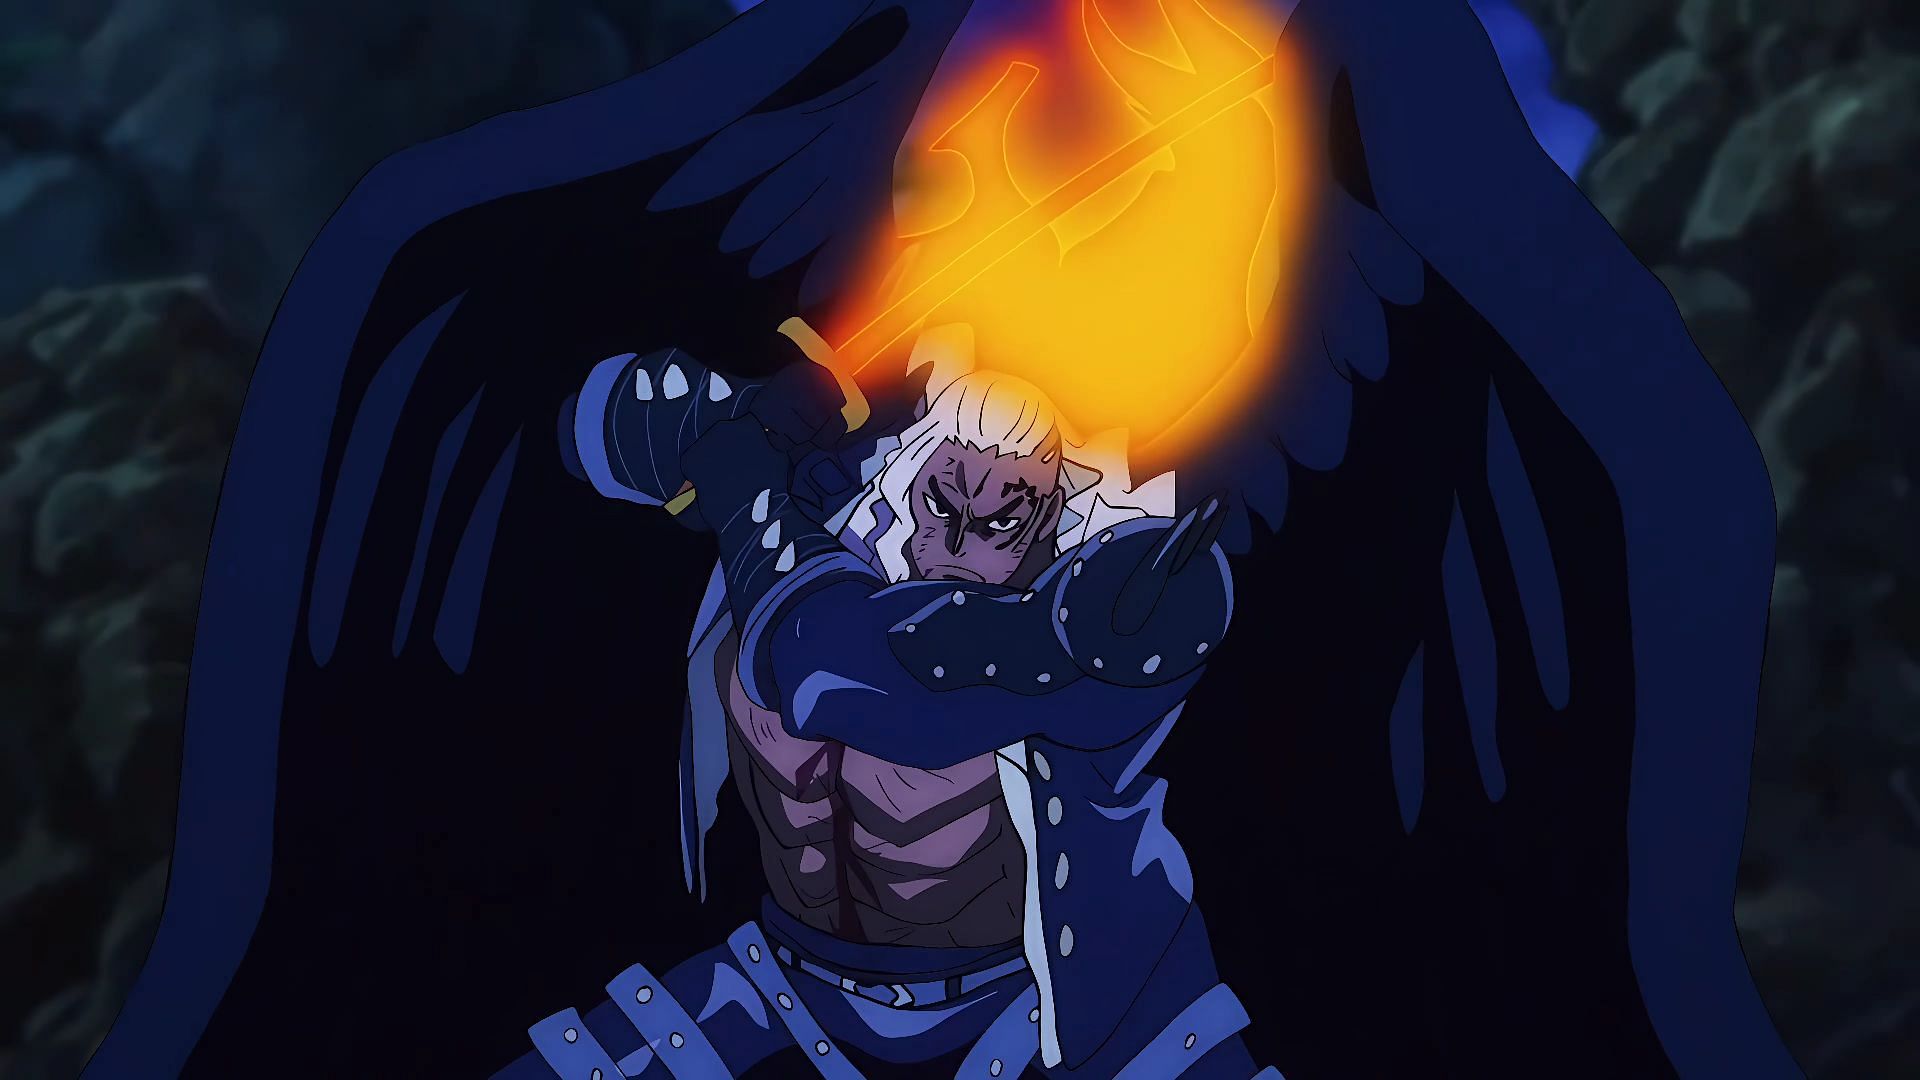 The Lunarian Alber &quot;King&quot; as seen in One Piece (Image via Toei Animation)